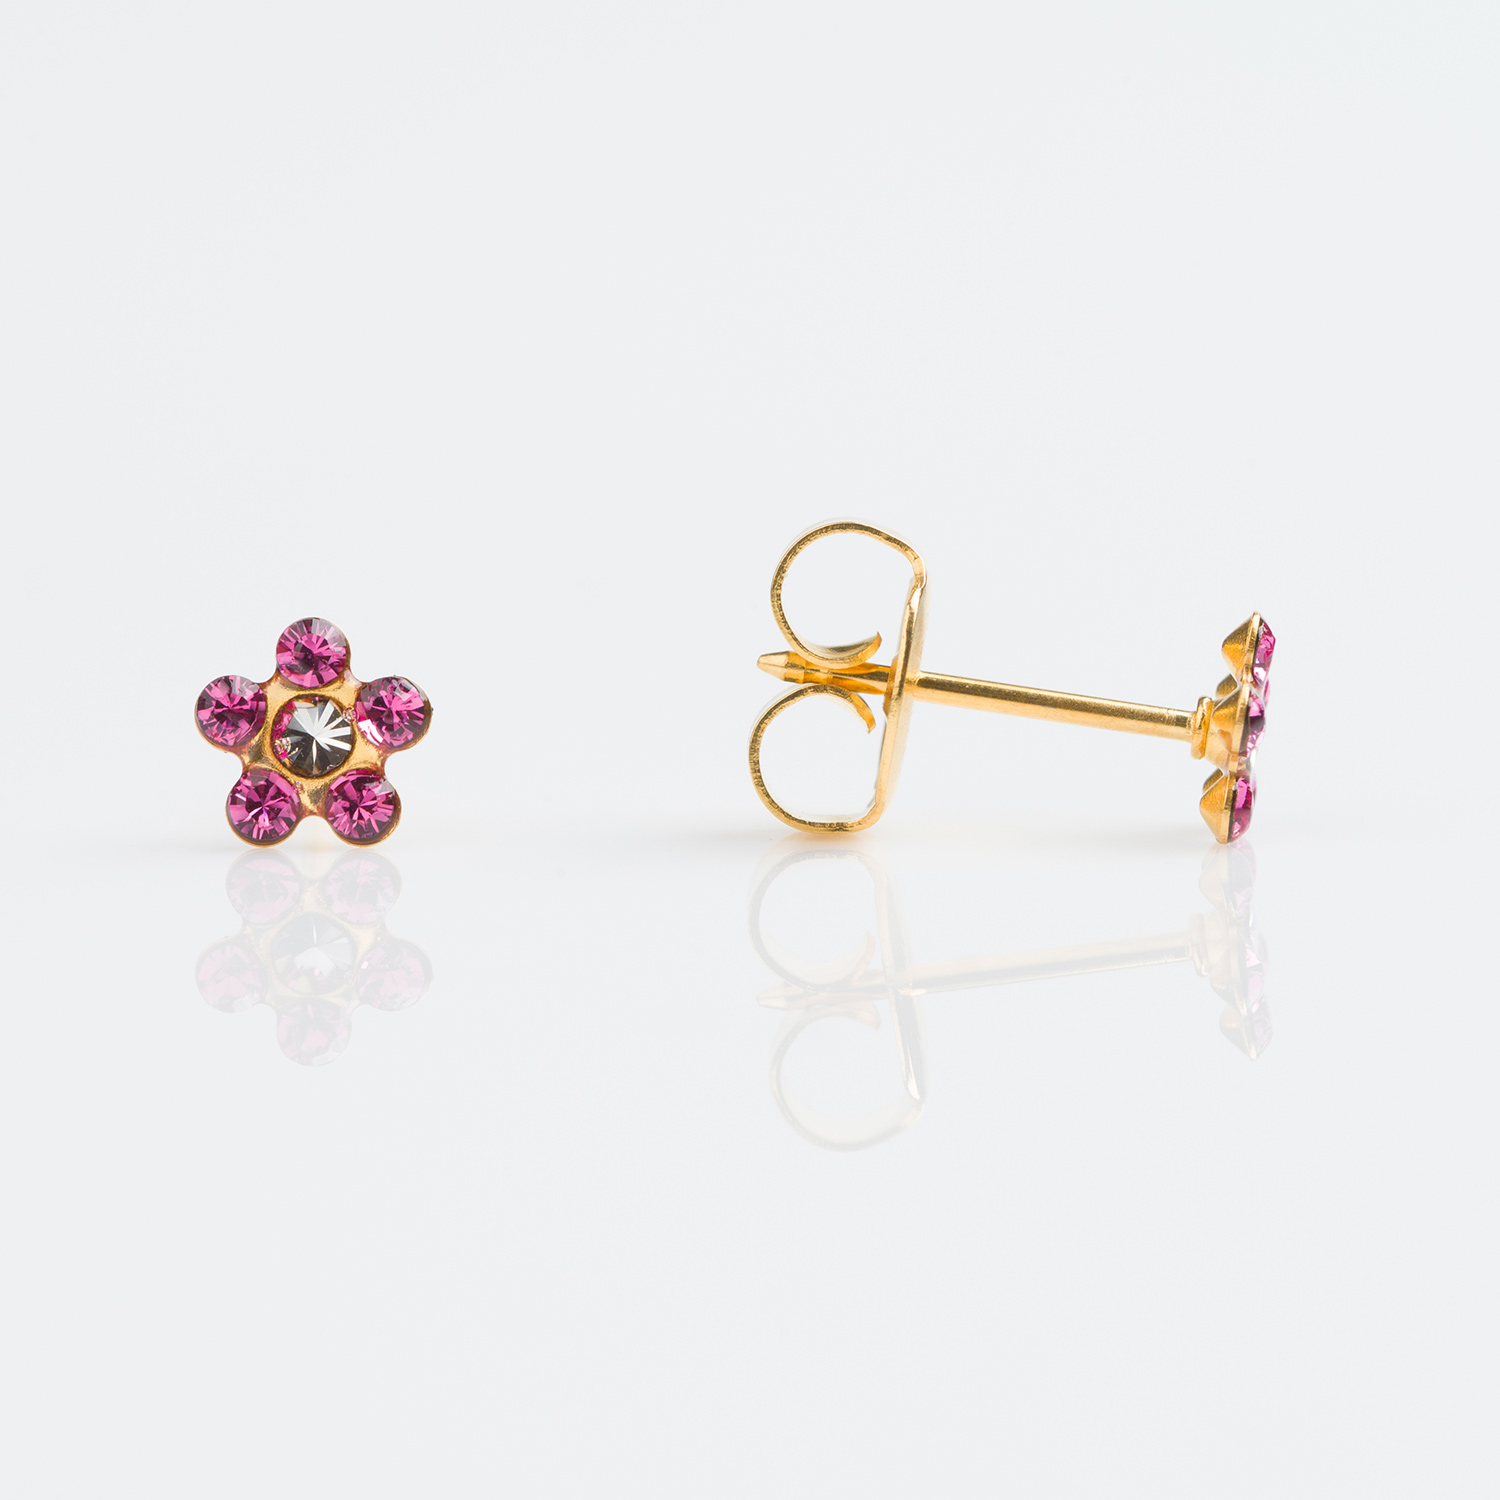 7518-6104 – Studex Gold Stone Daisy Rose Crystal Piercing Earrings